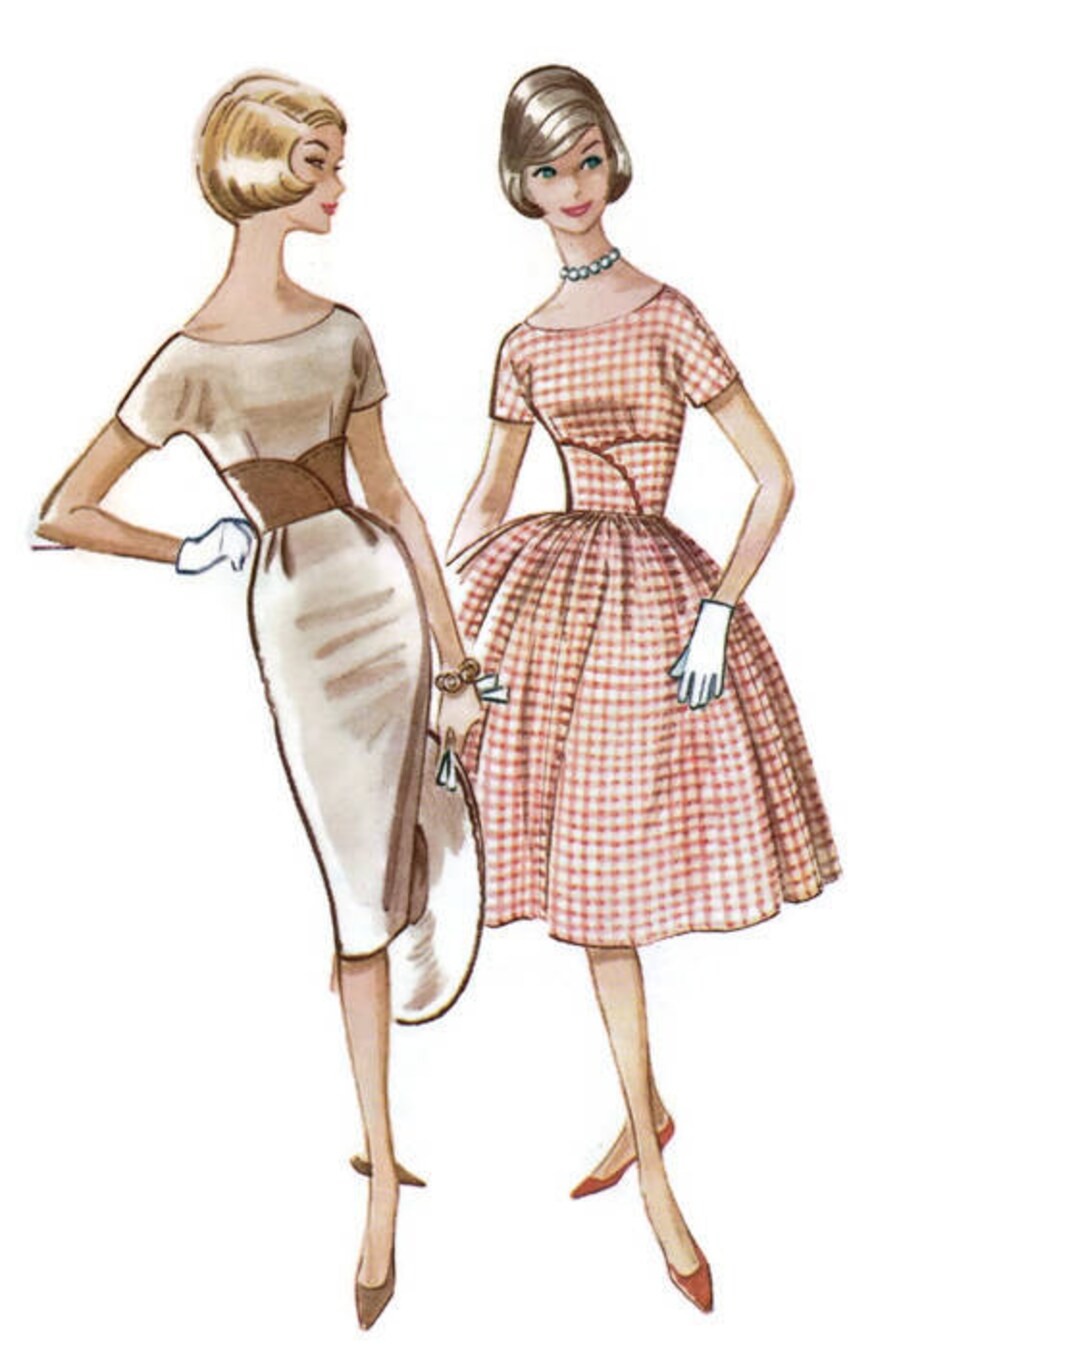 Mccall's 5816 Sewing Pattern Vintage 1950s Rockabilly - Etsy